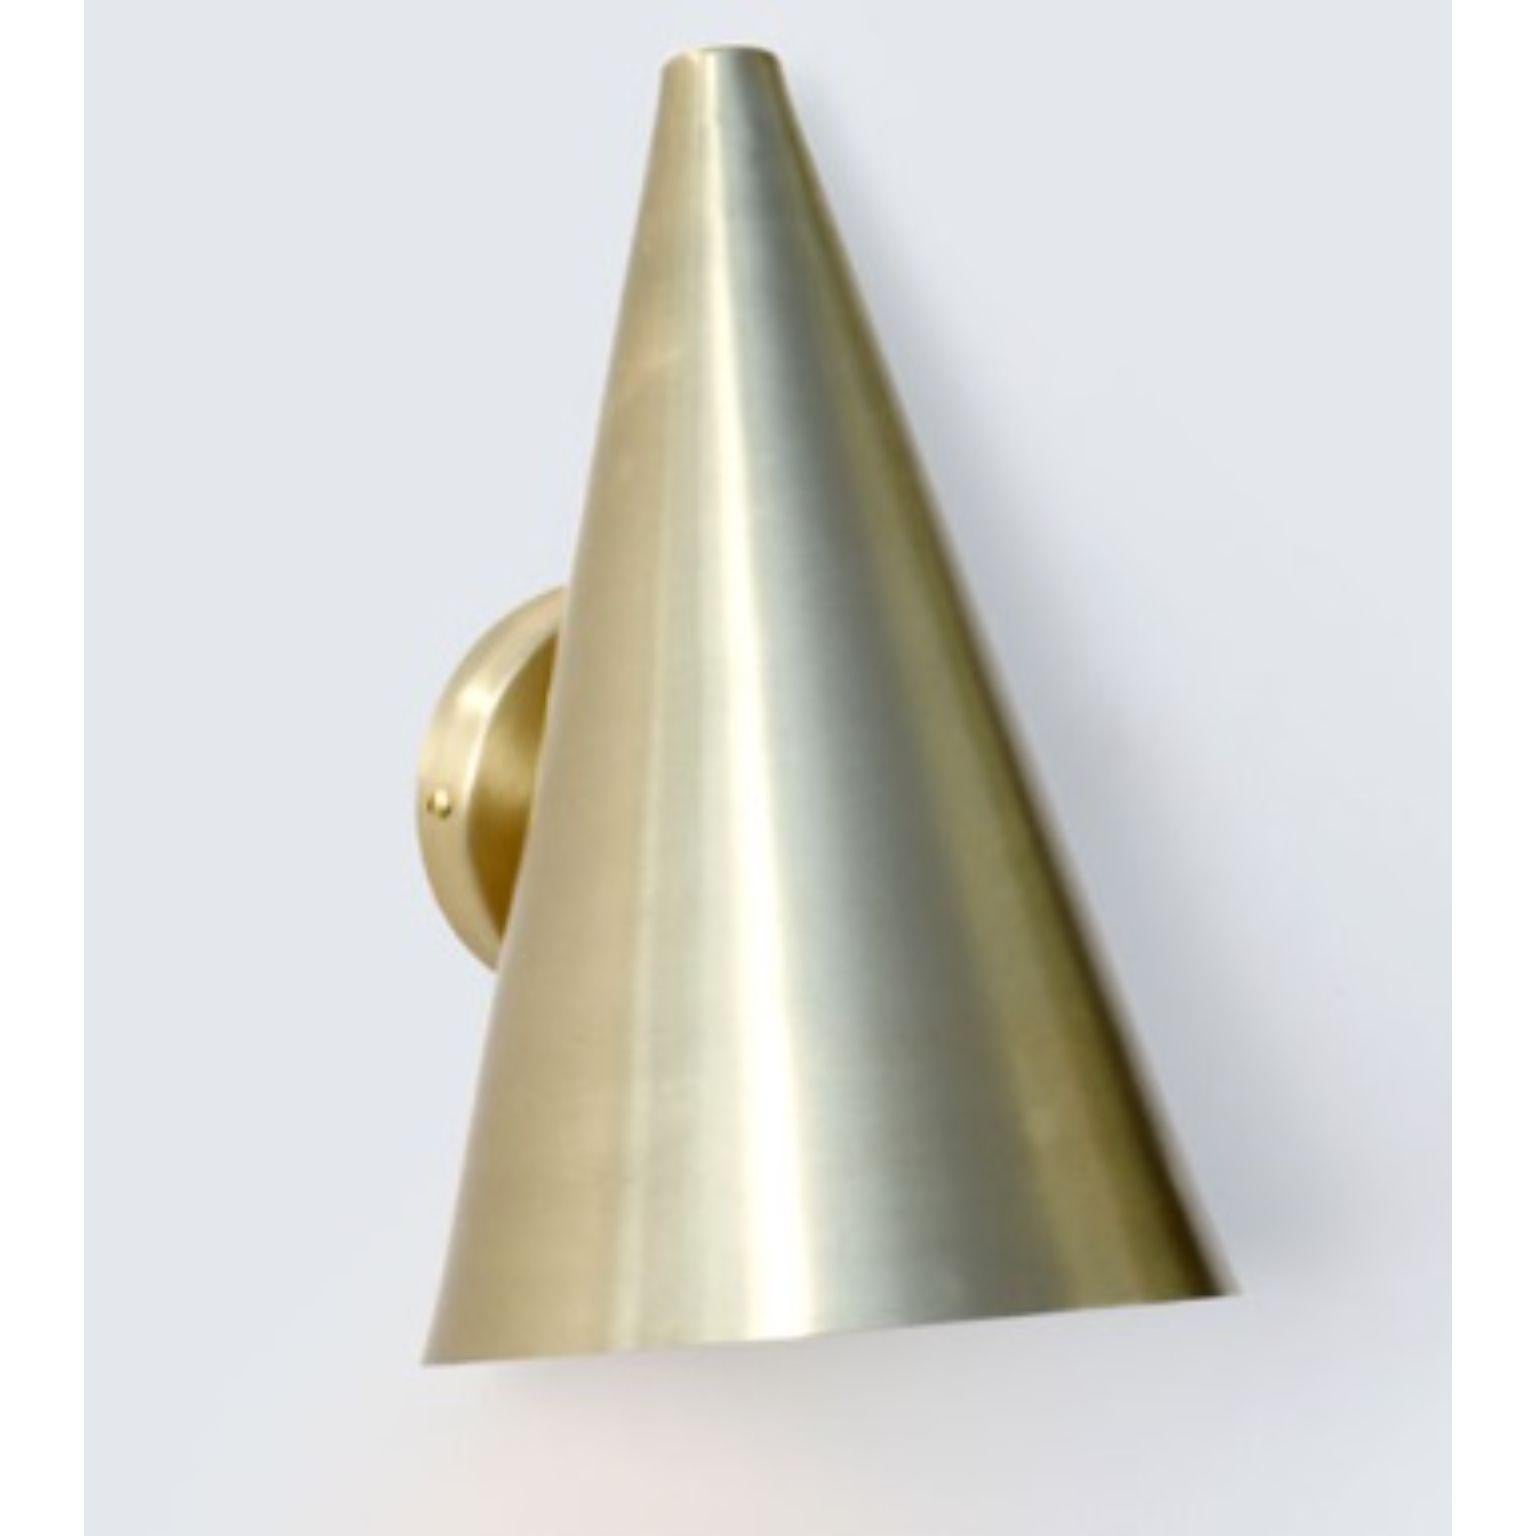 Cone Wall Sconce  by Lamp Shaper
Dimensions: D 19 x W 20.5 x H 30.5 cm.
Materials: Brass.

Different finishes available: raw brass, aged brass, burnt brass and brushed brass Please contact us.

All our lamps can be wired according to each country.